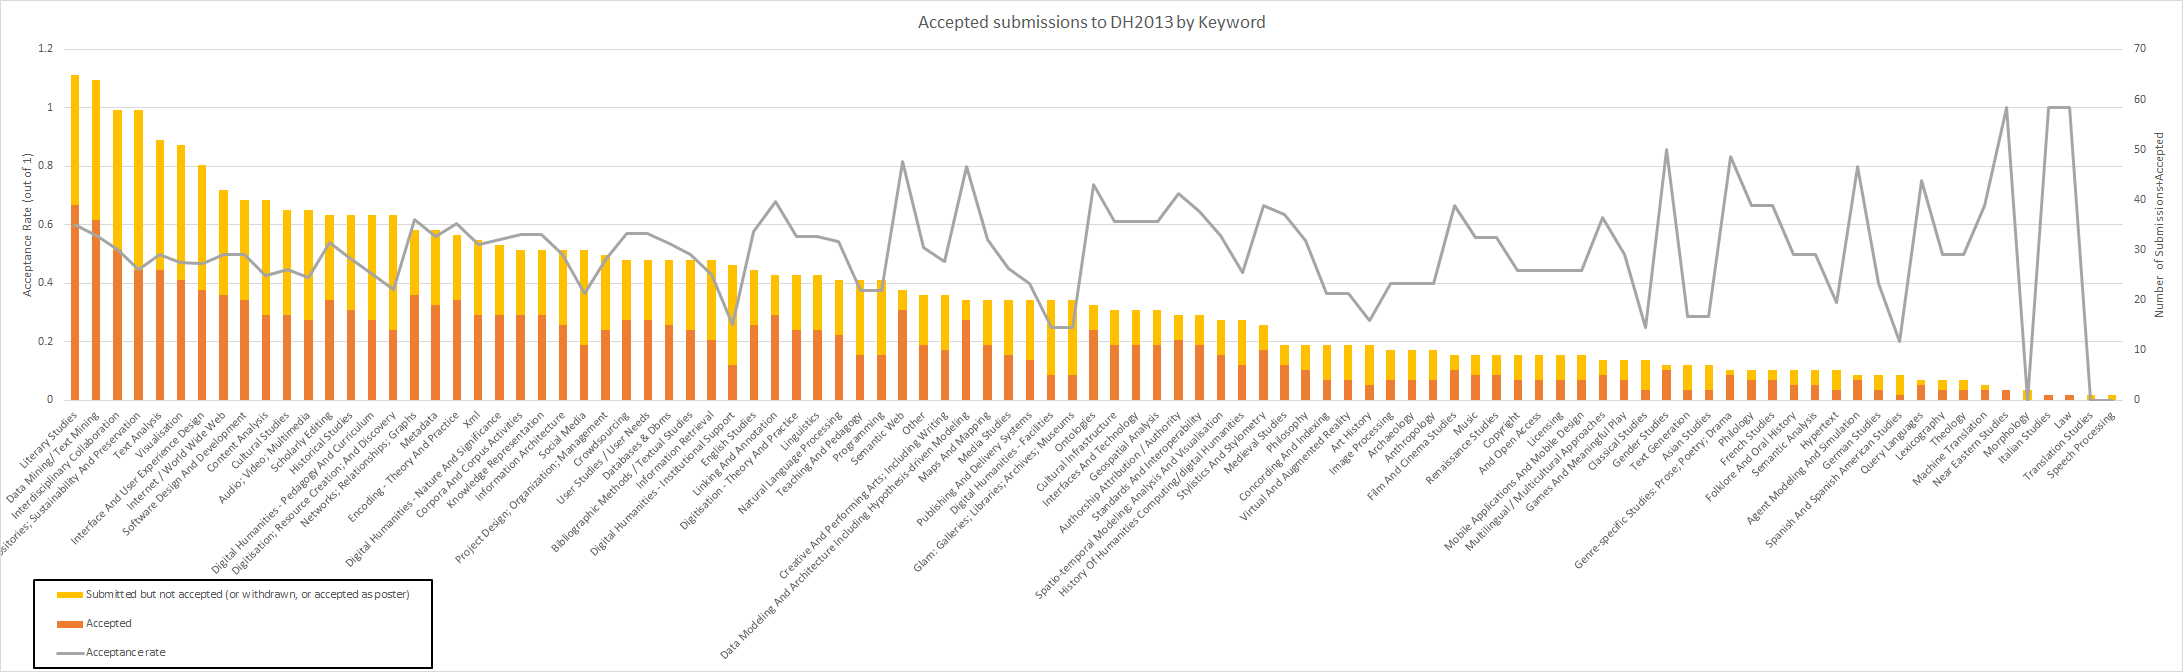 Acceptance rates of DH2013 by Keywords attached to submissions, sorted by number of submissions.